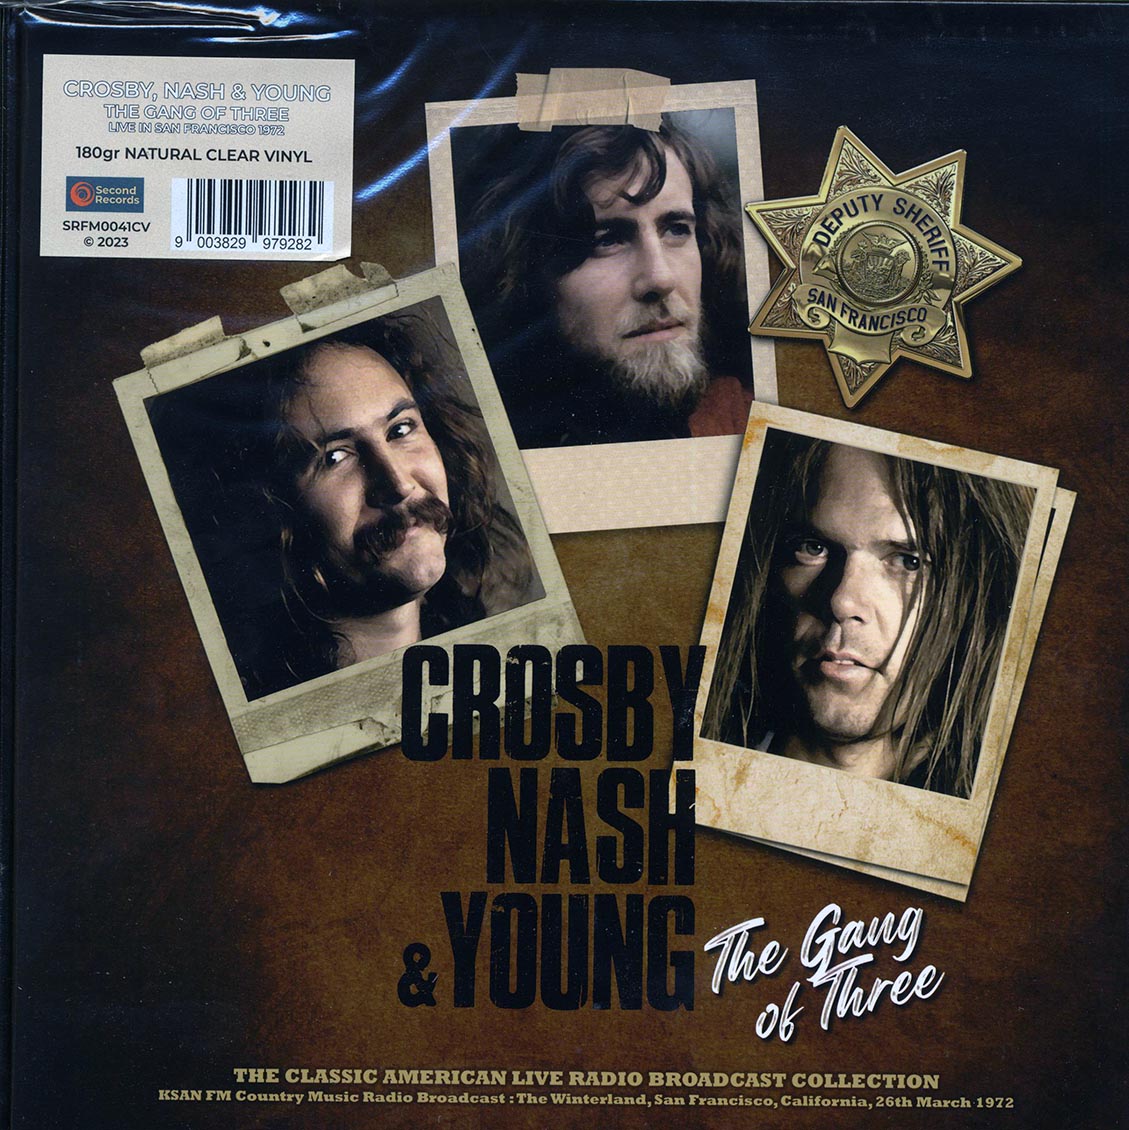 Crosby, Nash & Young - The Gang Of Three: The Winterland San Francisco 26th March 1972 KSAN FM Country Music Radio Broadcast (180g) (clear vinyl) - Vinyl LP